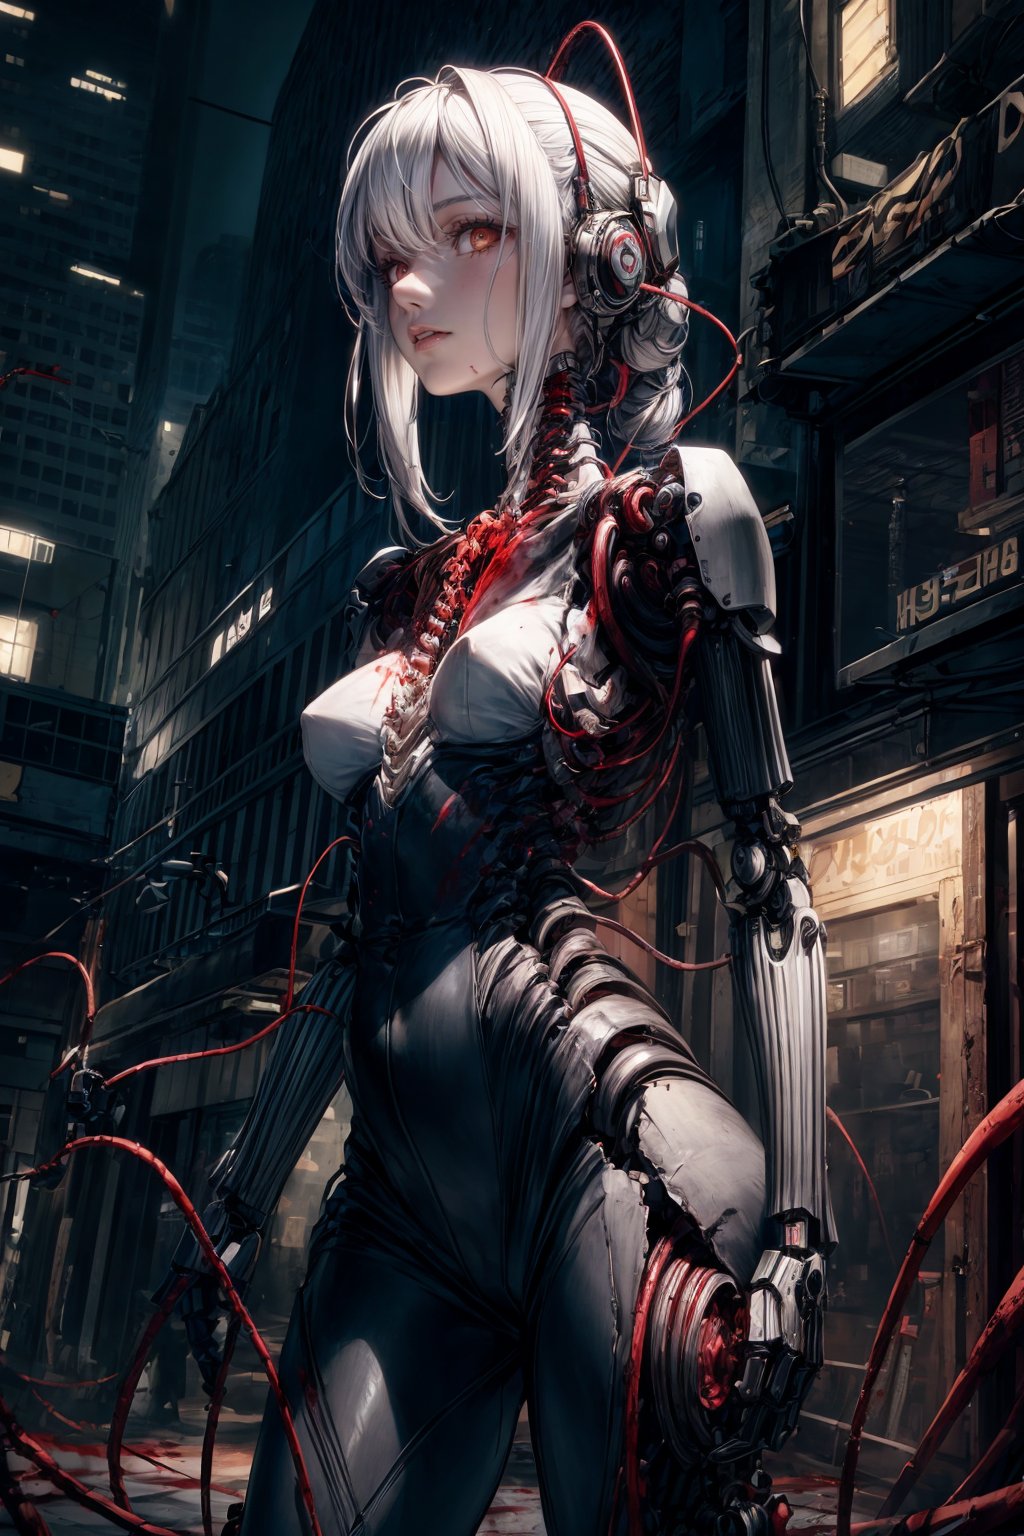 Single Female, Realistic, Cinematic Live Action, Solo, Staring at Viewer, Very Long Black Hair, White Hair, Bangs, Random Eye Color, Standing, Cowboy Shot, Shiny, (Detailed Mechanical Pipes), Wiring (Mechanical Joints: 1.2), (Mechanical Limbs)), (Blood Vessels Connected to Tubes), (Mechanical Spine Connected to Back), (Mechanical Cervical Spine Connected to Neck)), Emotionless, (Wires and Cables Connected to Neck: 1.2), (Wires and Cables Over Head: 1.2)(Focus on Character), Sci-Fi, Highly Detailed, Colorful, Most Detailed Joints, Mechanical, Sci-Fi, Android, Joints, Cables, Mechanical Arm, Mechanical Parts, Wires, Tubes, Spine, Change Pose, Change Cityscape, Burning House and Partially Destroyed City Edo Period in Background, Additional Details, Mechanical Pipe Wiring,Machinery Tube Wiring<lora:EMS-63140-EMS:0.400000>, <lora:EMS-340072-EMS:0.400000>, <lora:EMS-179-EMS:0.500000>